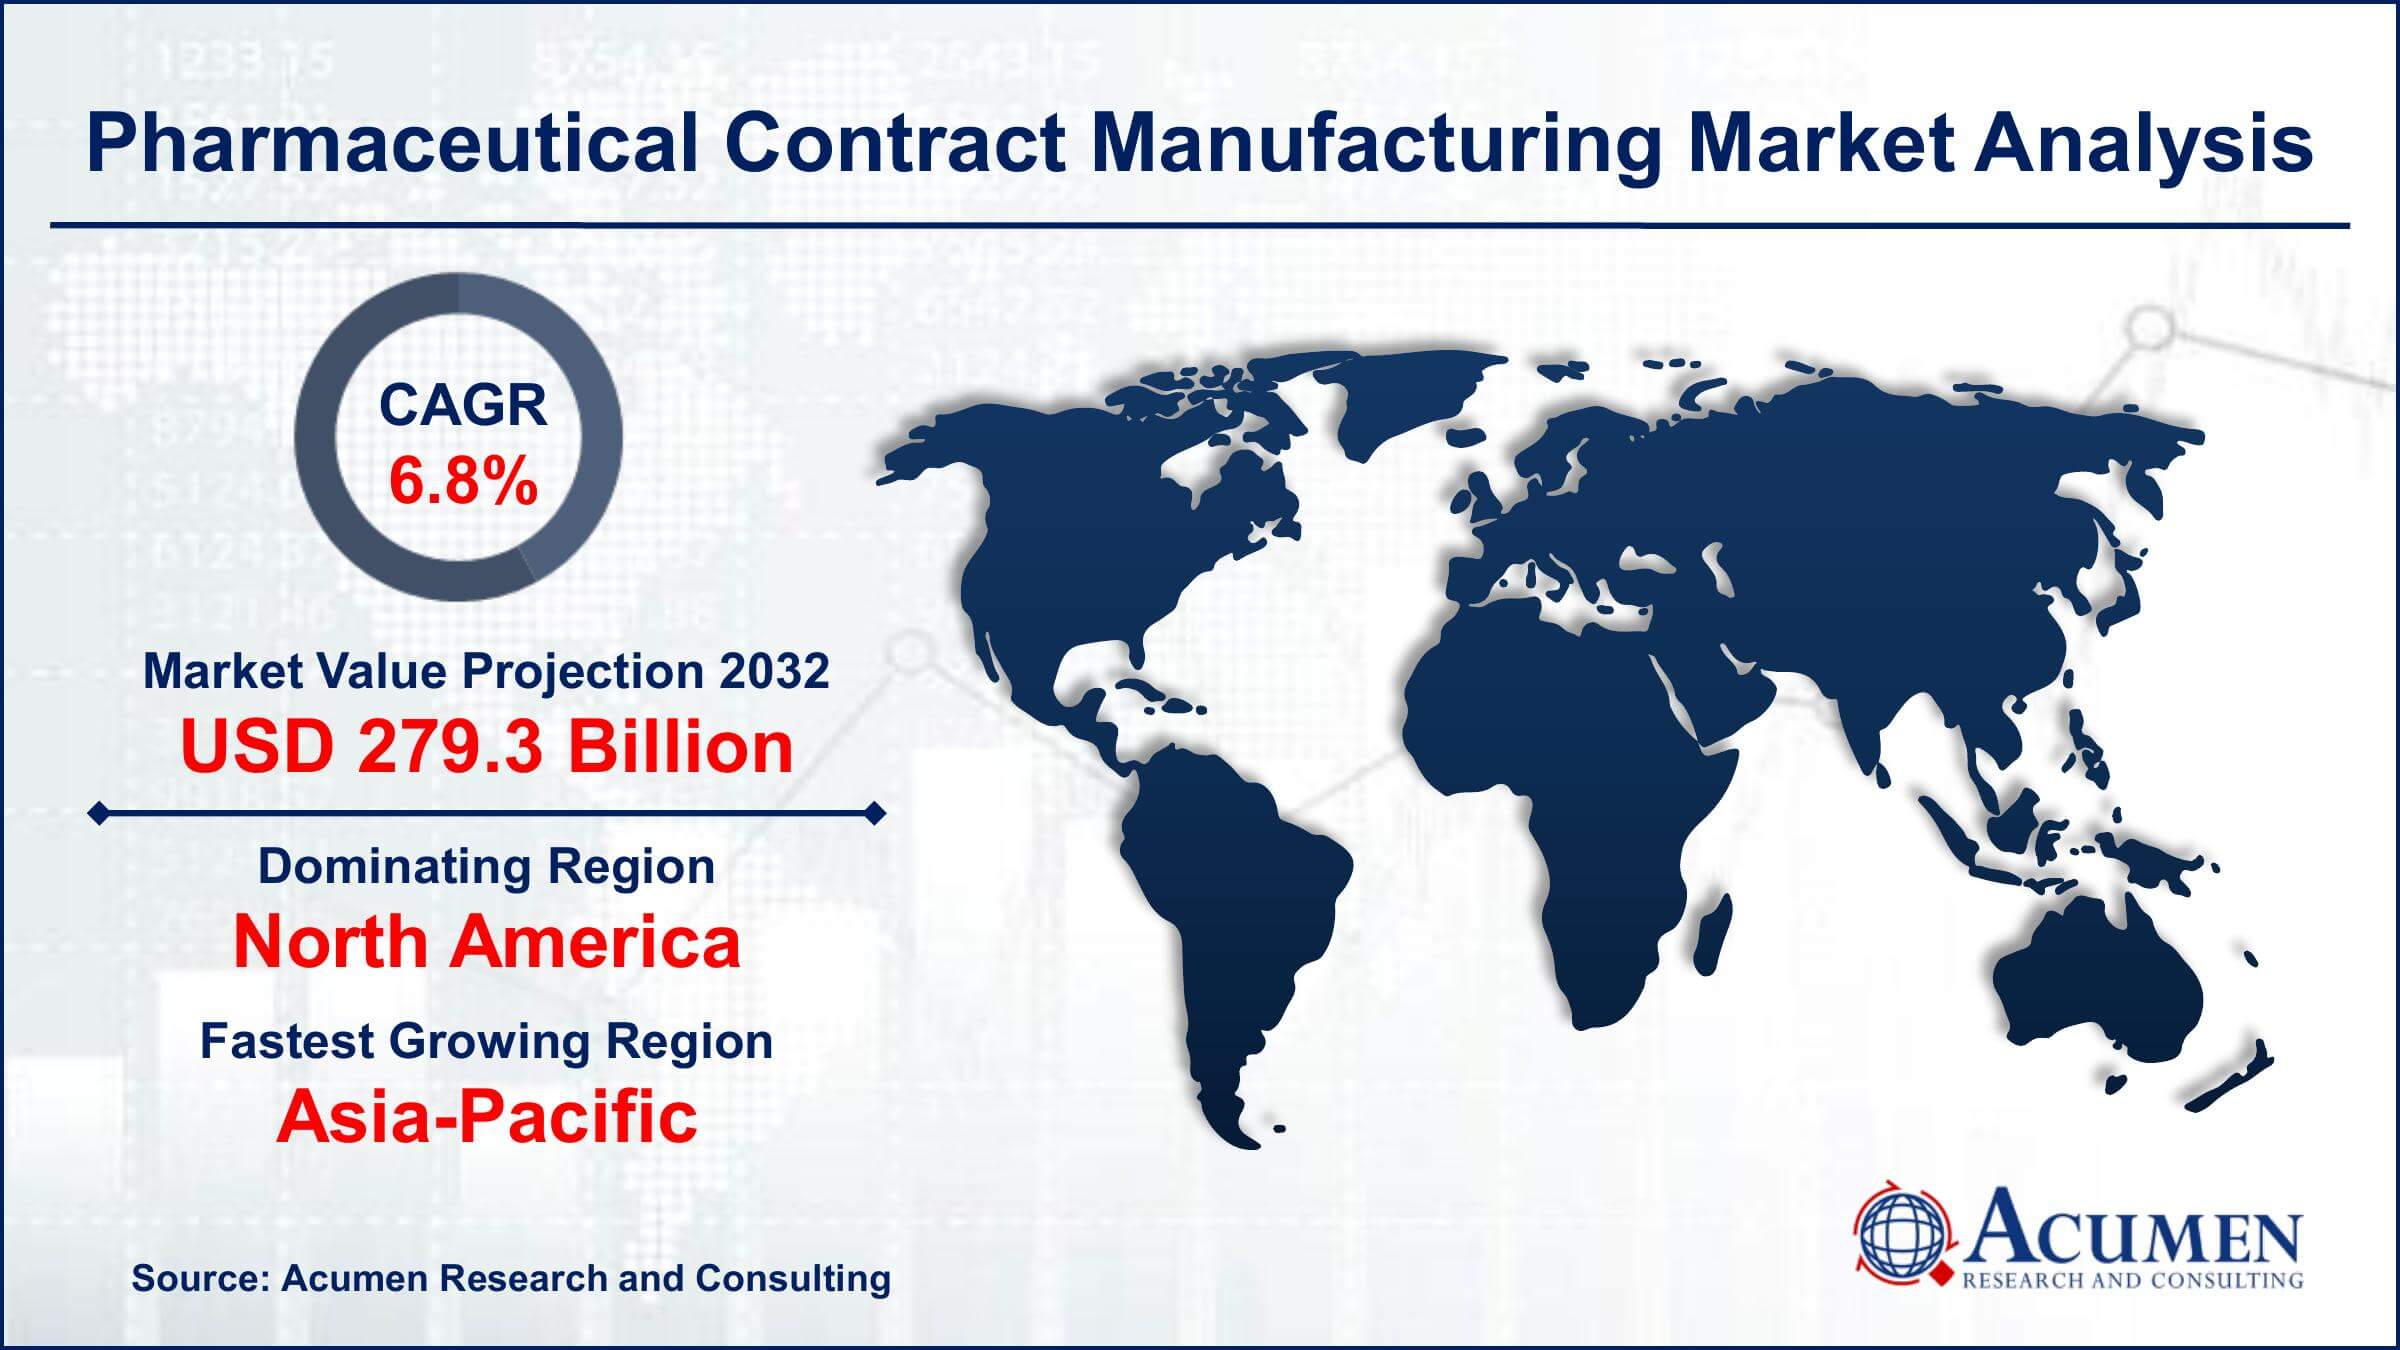 Global Pharmaceutical Contract Manufacturing Market Trends